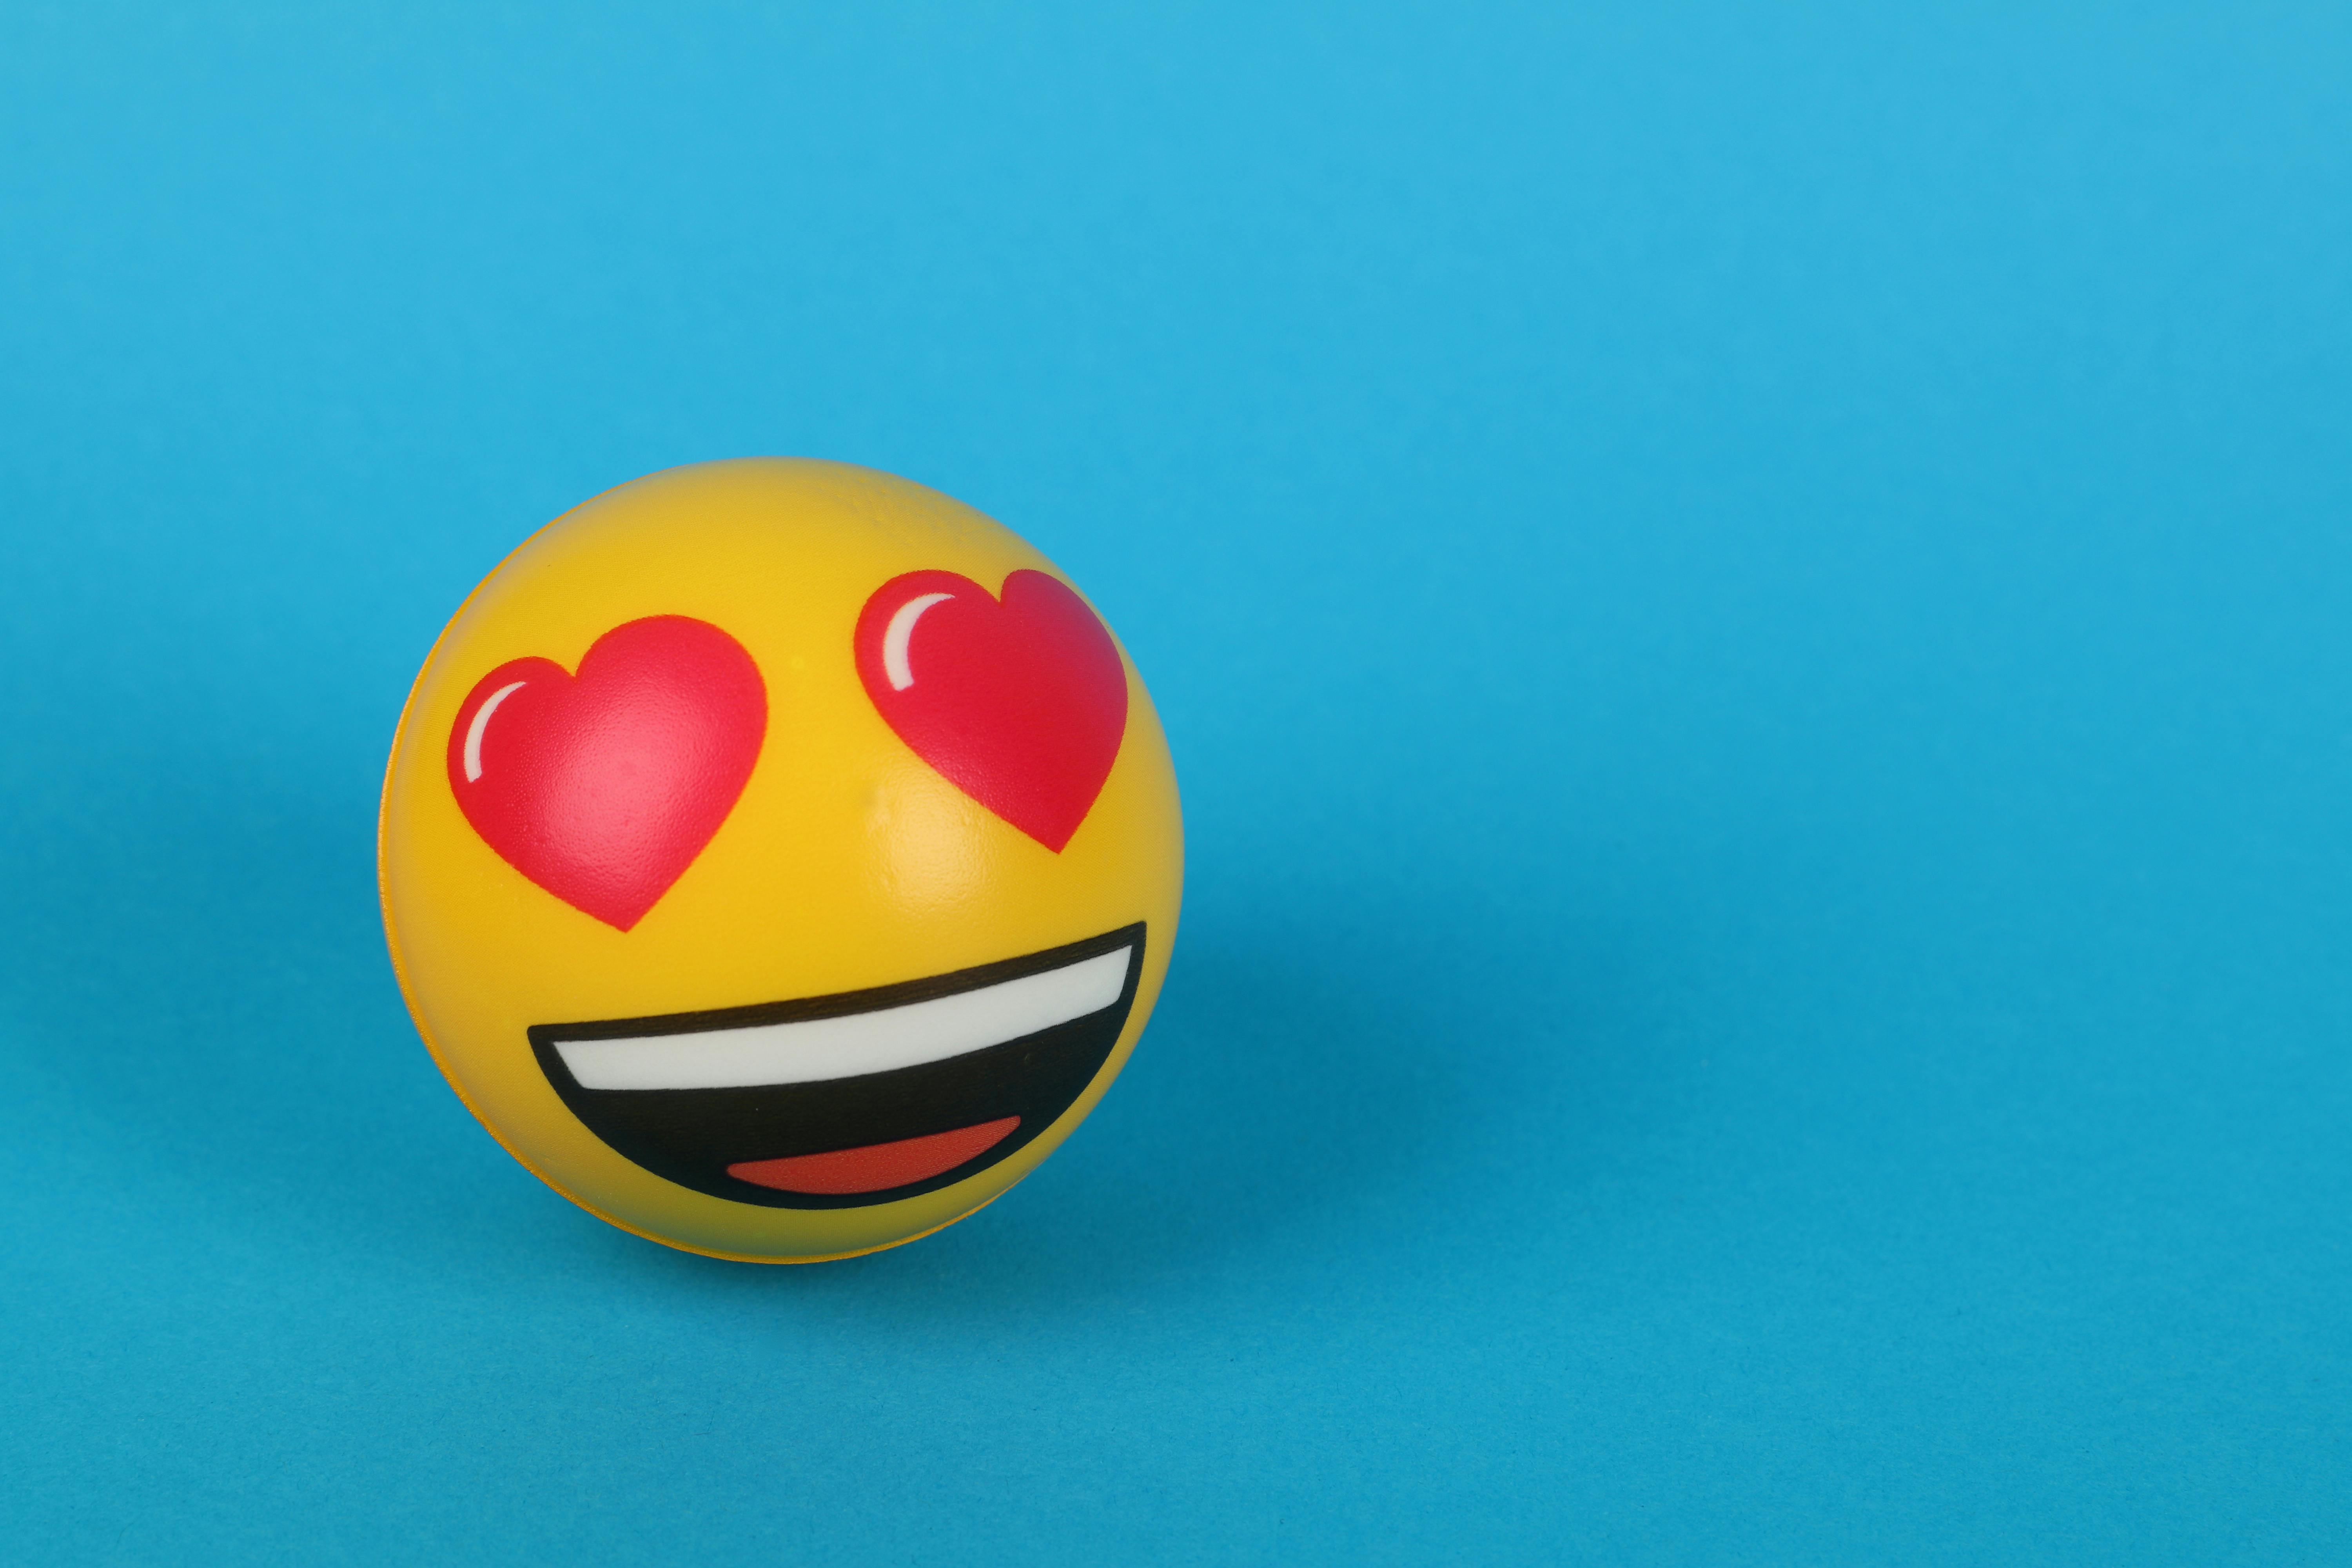 A Laughing Emoji with tears over Blue Surface · Free Stock Photo